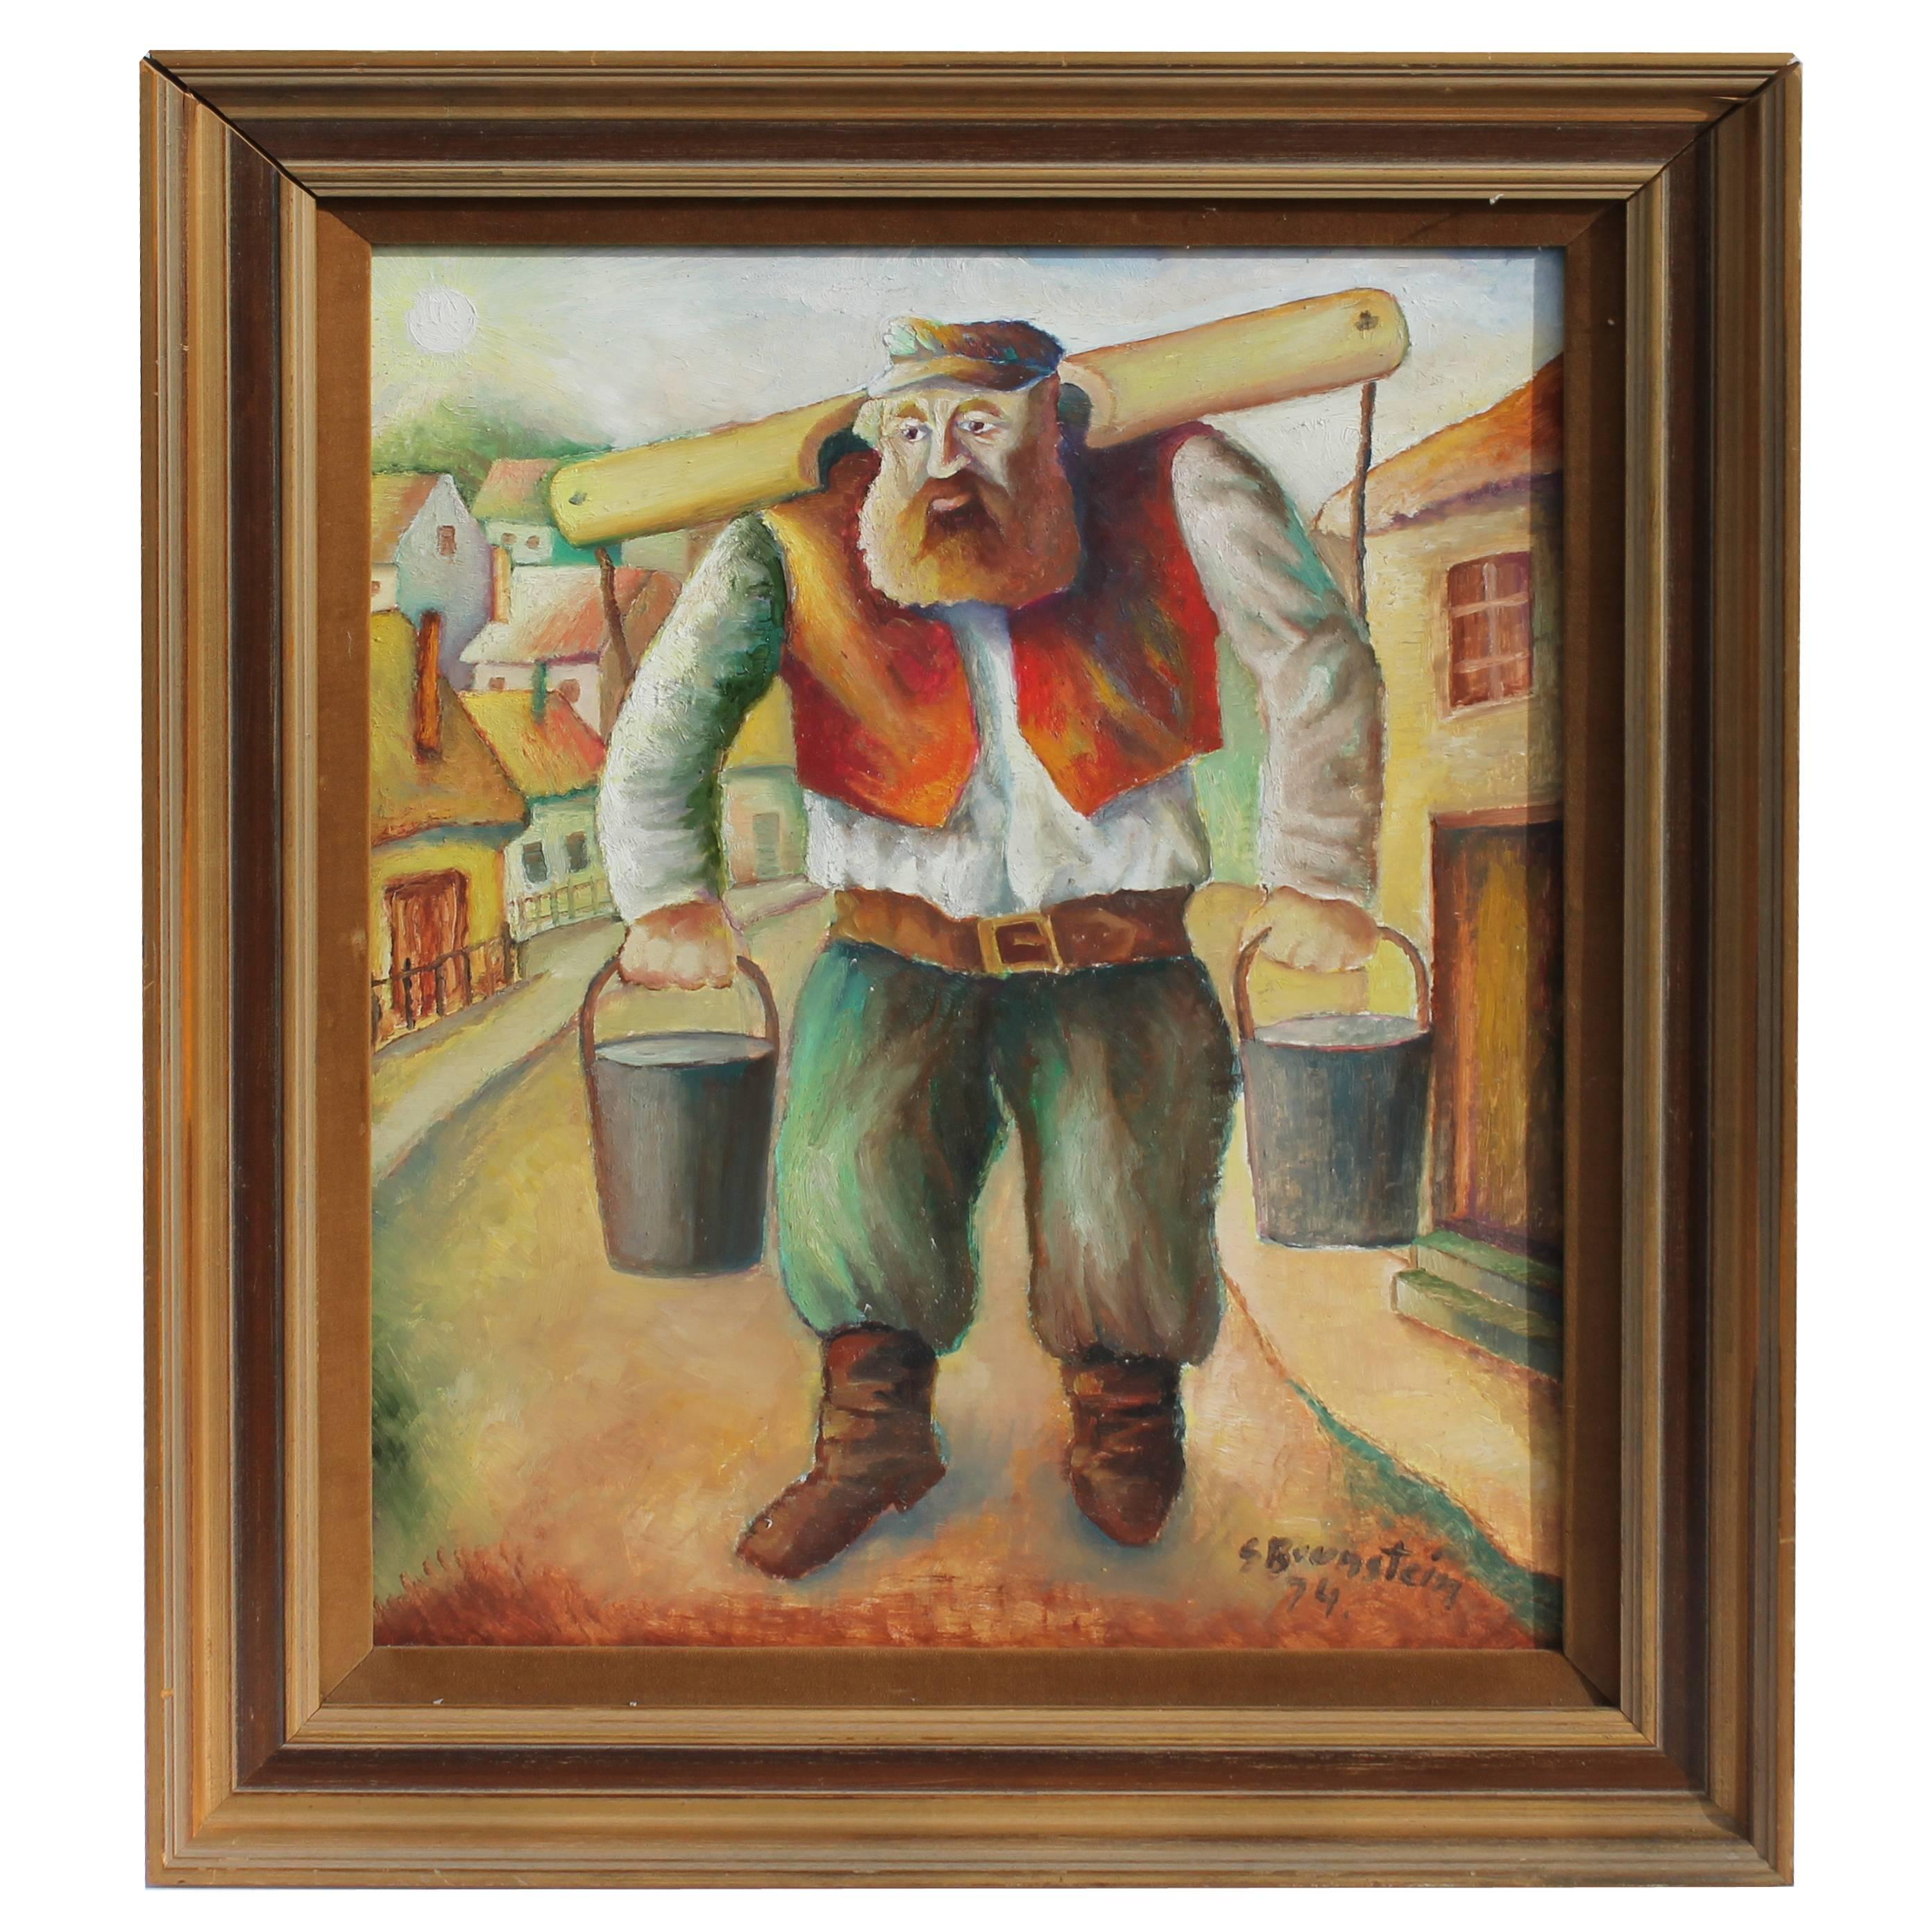 Signed and Dated Oil Painting of a Judaic Lumberjack